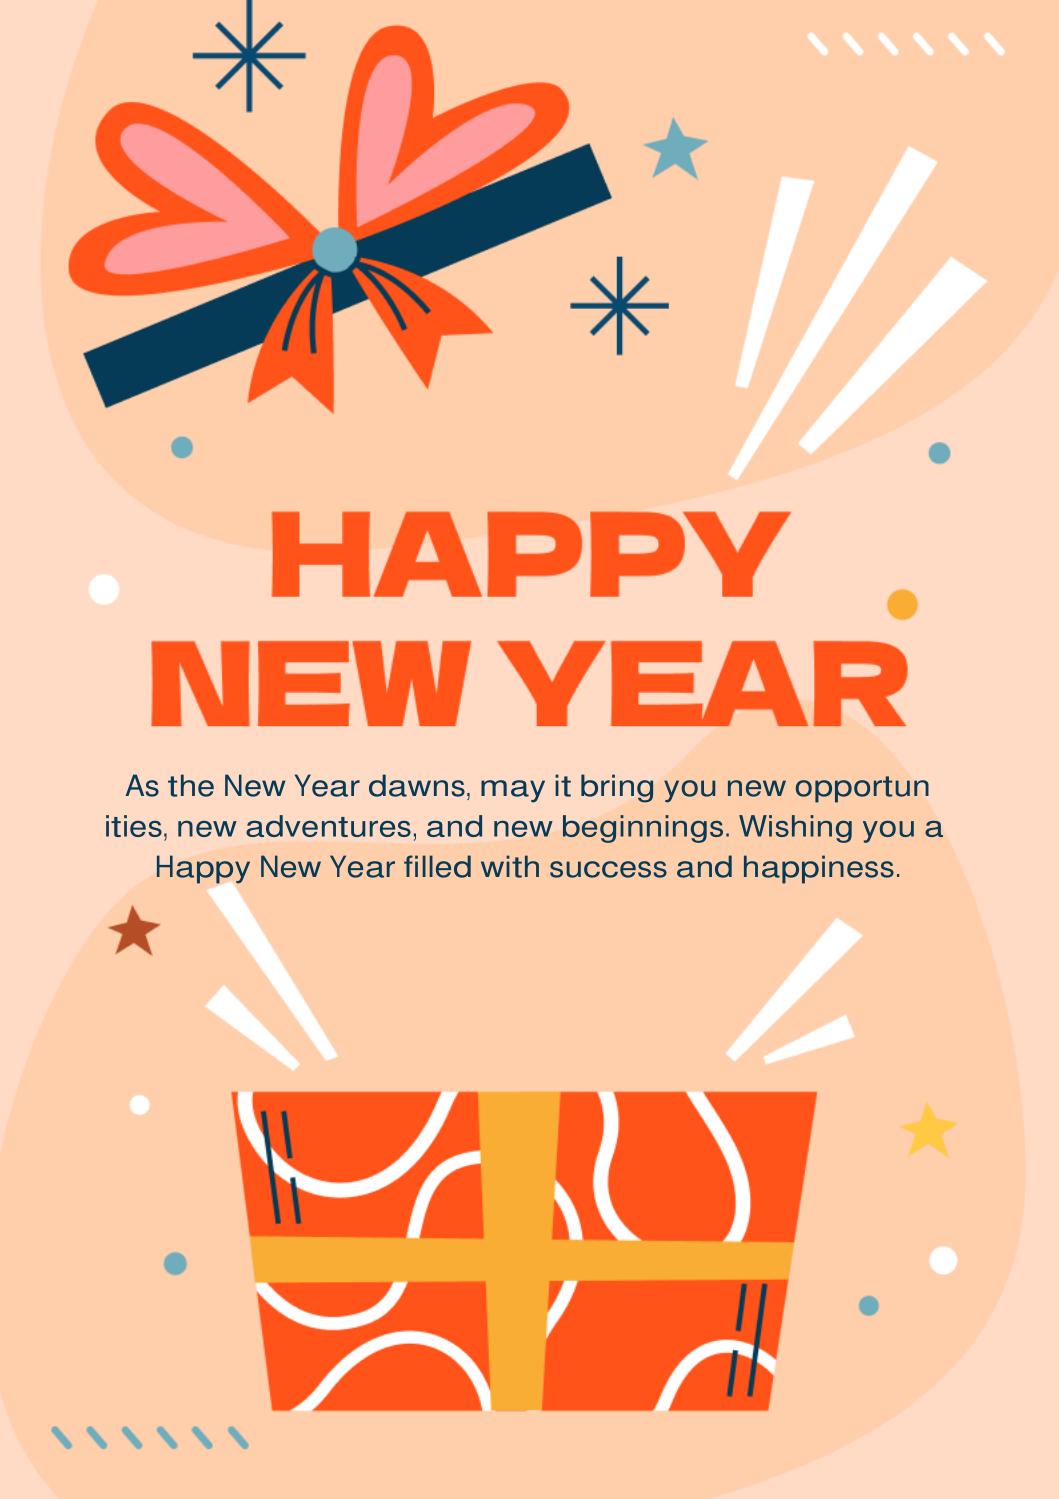 PDF Card for New Year Wishes